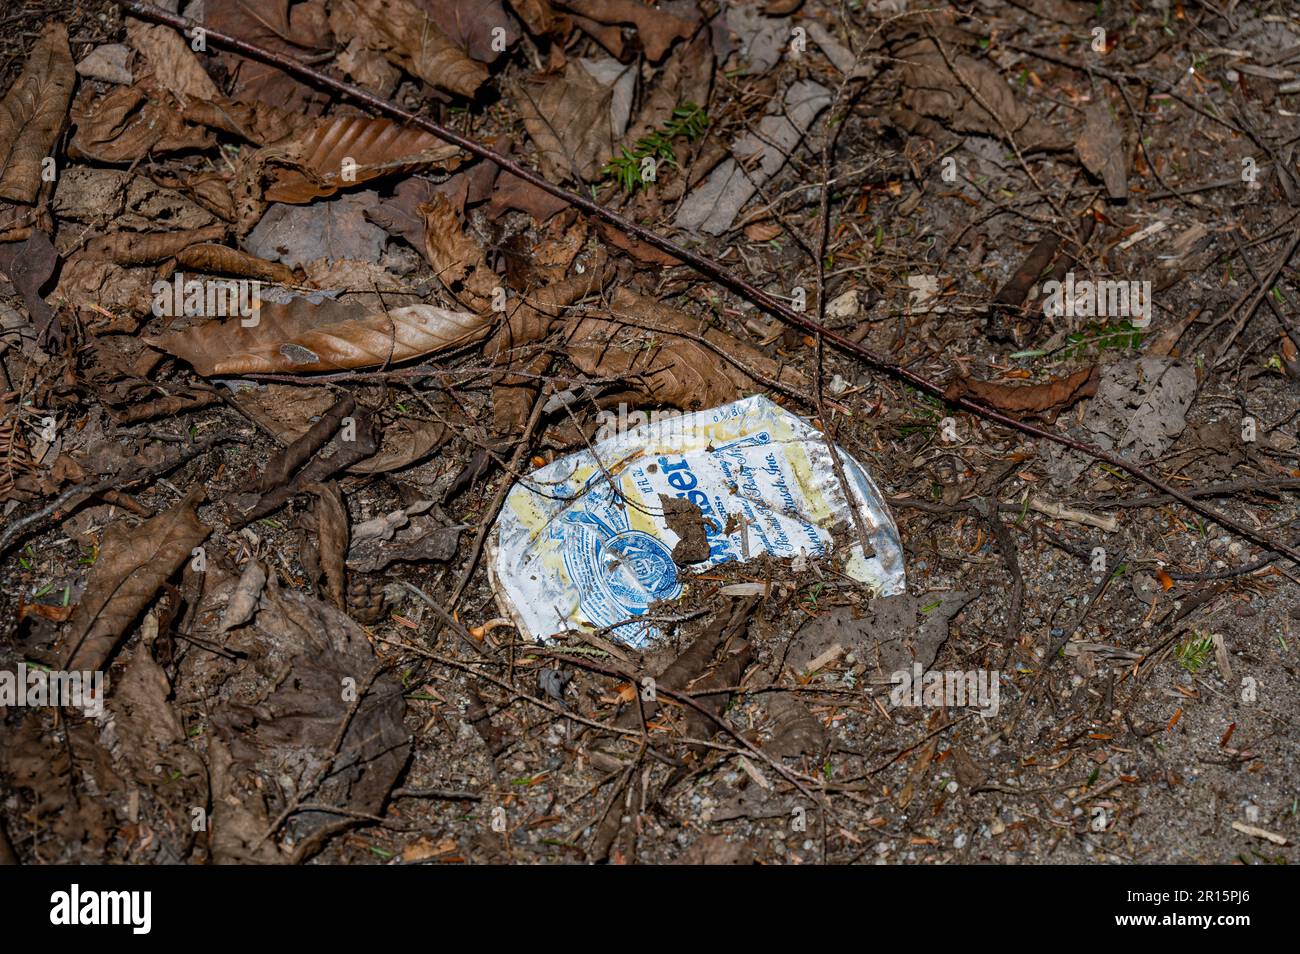 A crushed Budweiser beer can thrown in the leaves in the Adirondack Mountains, NY USA Stock Photo